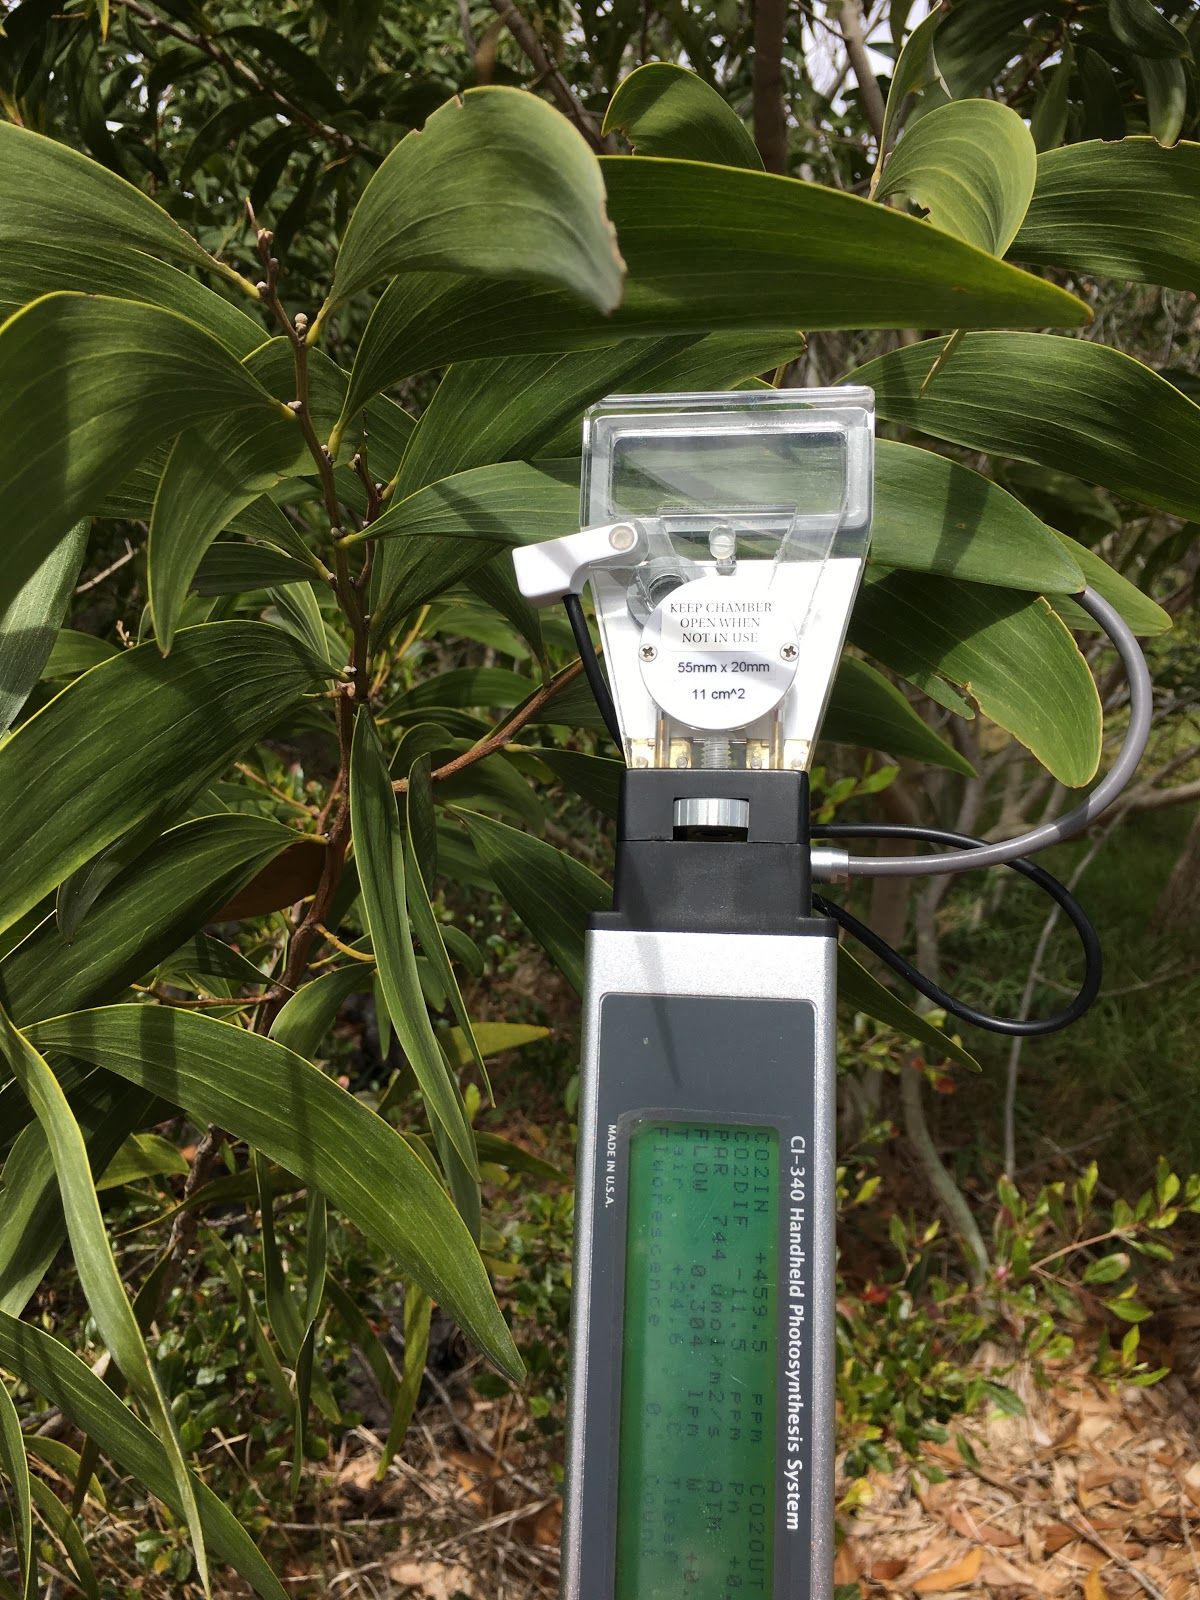 The CID photosynthesis analyzer is used on Koa phyllode to monitor photosynthesis in the leaves and ensure that the Koa plants are healthy.